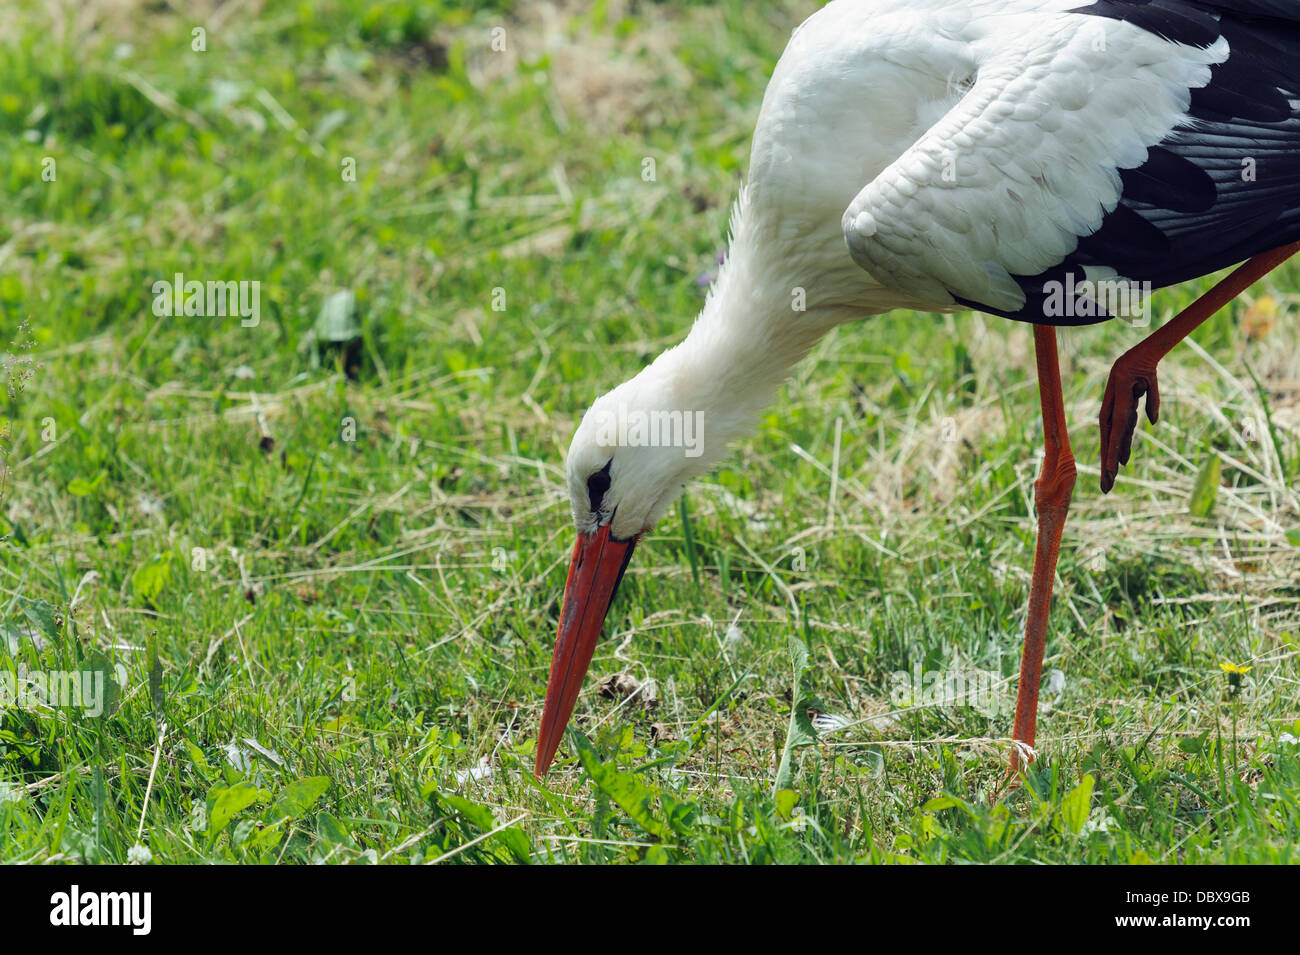 Stork in Lithuania, Europe Stock Photo